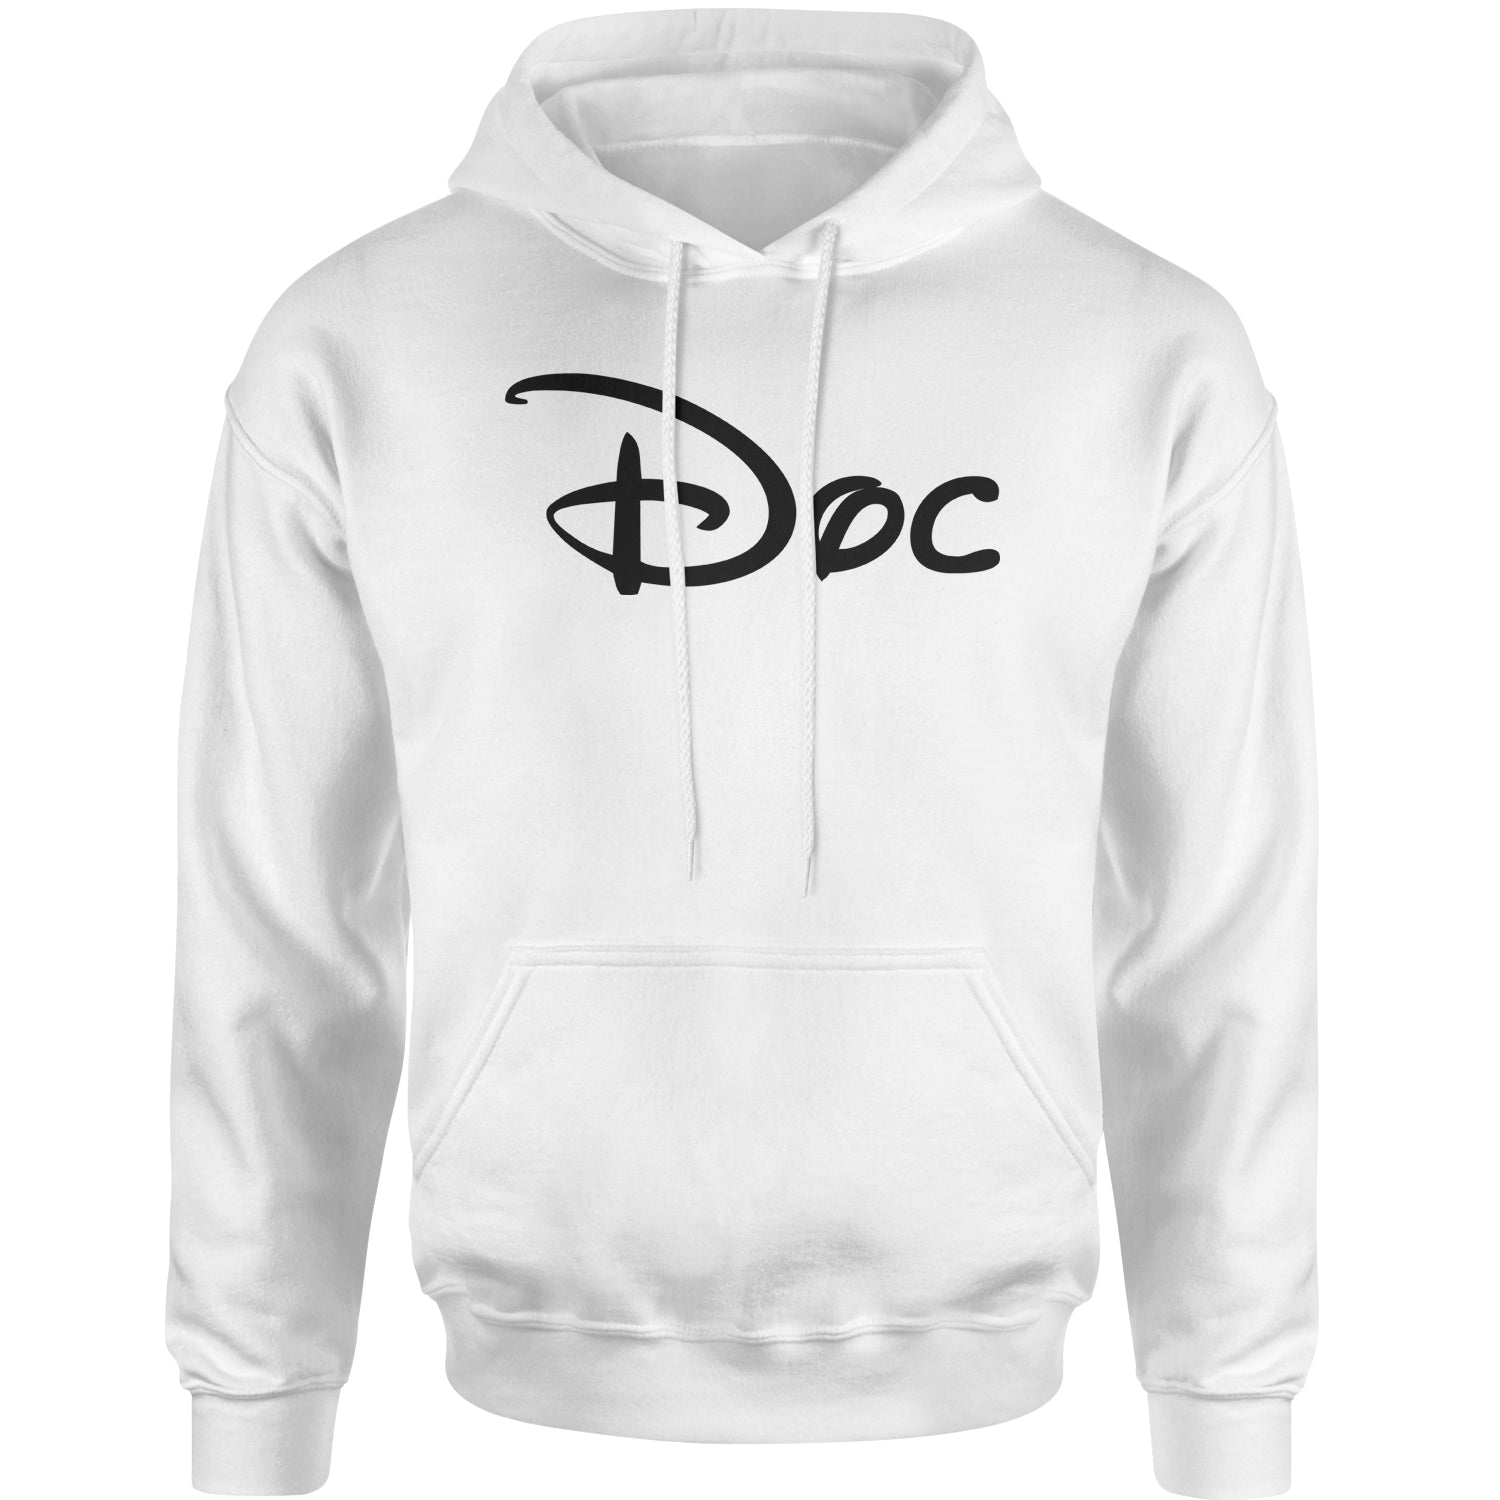 Doc - 7 Dwarfs Costume Adult Hoodie Sweatshirt and, costume, dwarfs, group, halloween, matching, seven, snow, the, white by Expression Tees